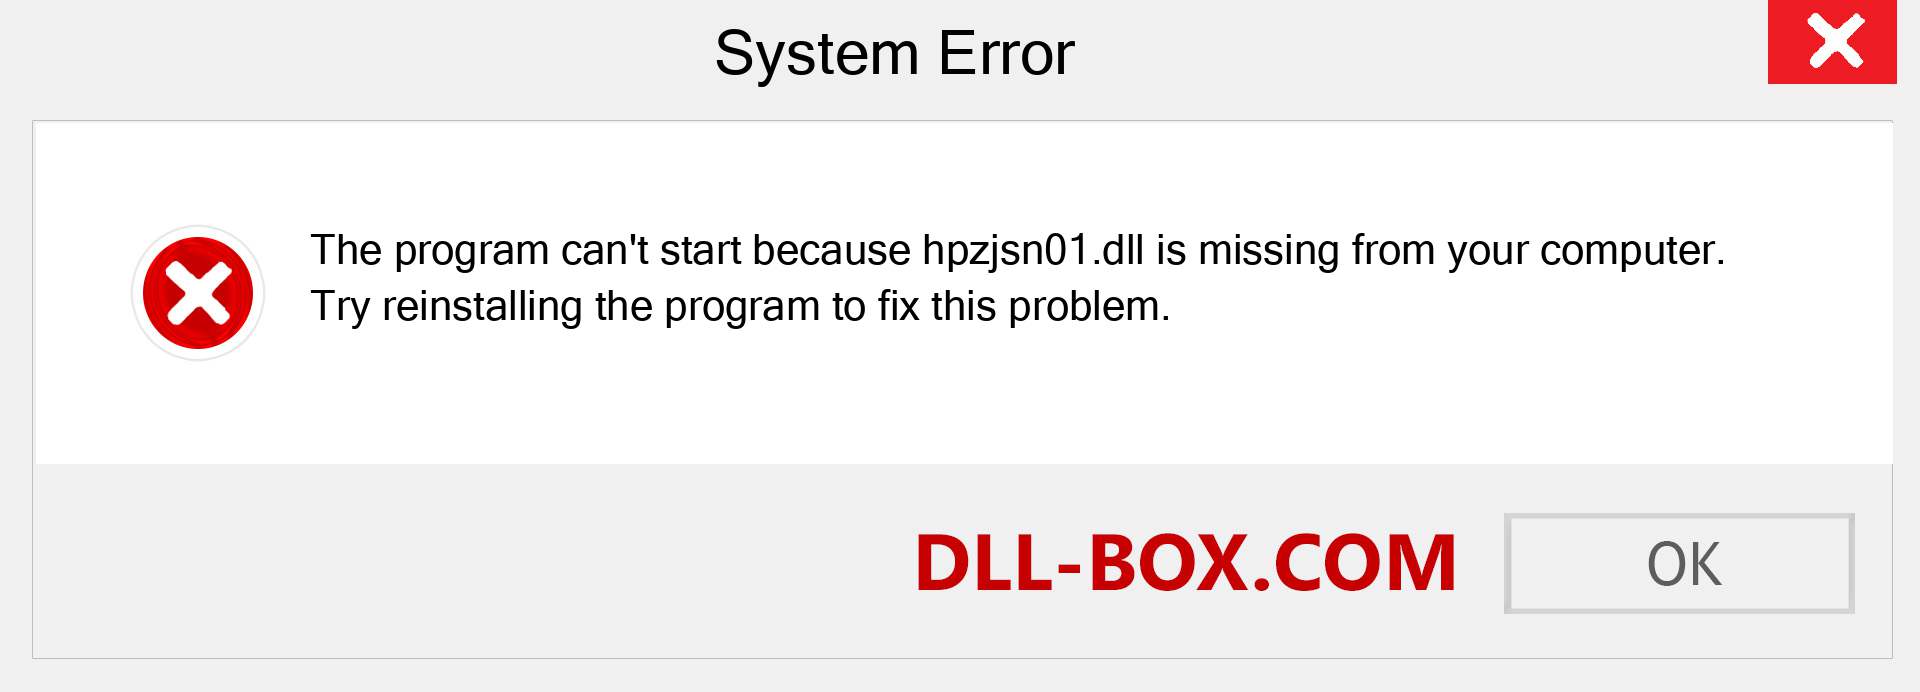  hpzjsn01.dll file is missing?. Download for Windows 7, 8, 10 - Fix  hpzjsn01 dll Missing Error on Windows, photos, images